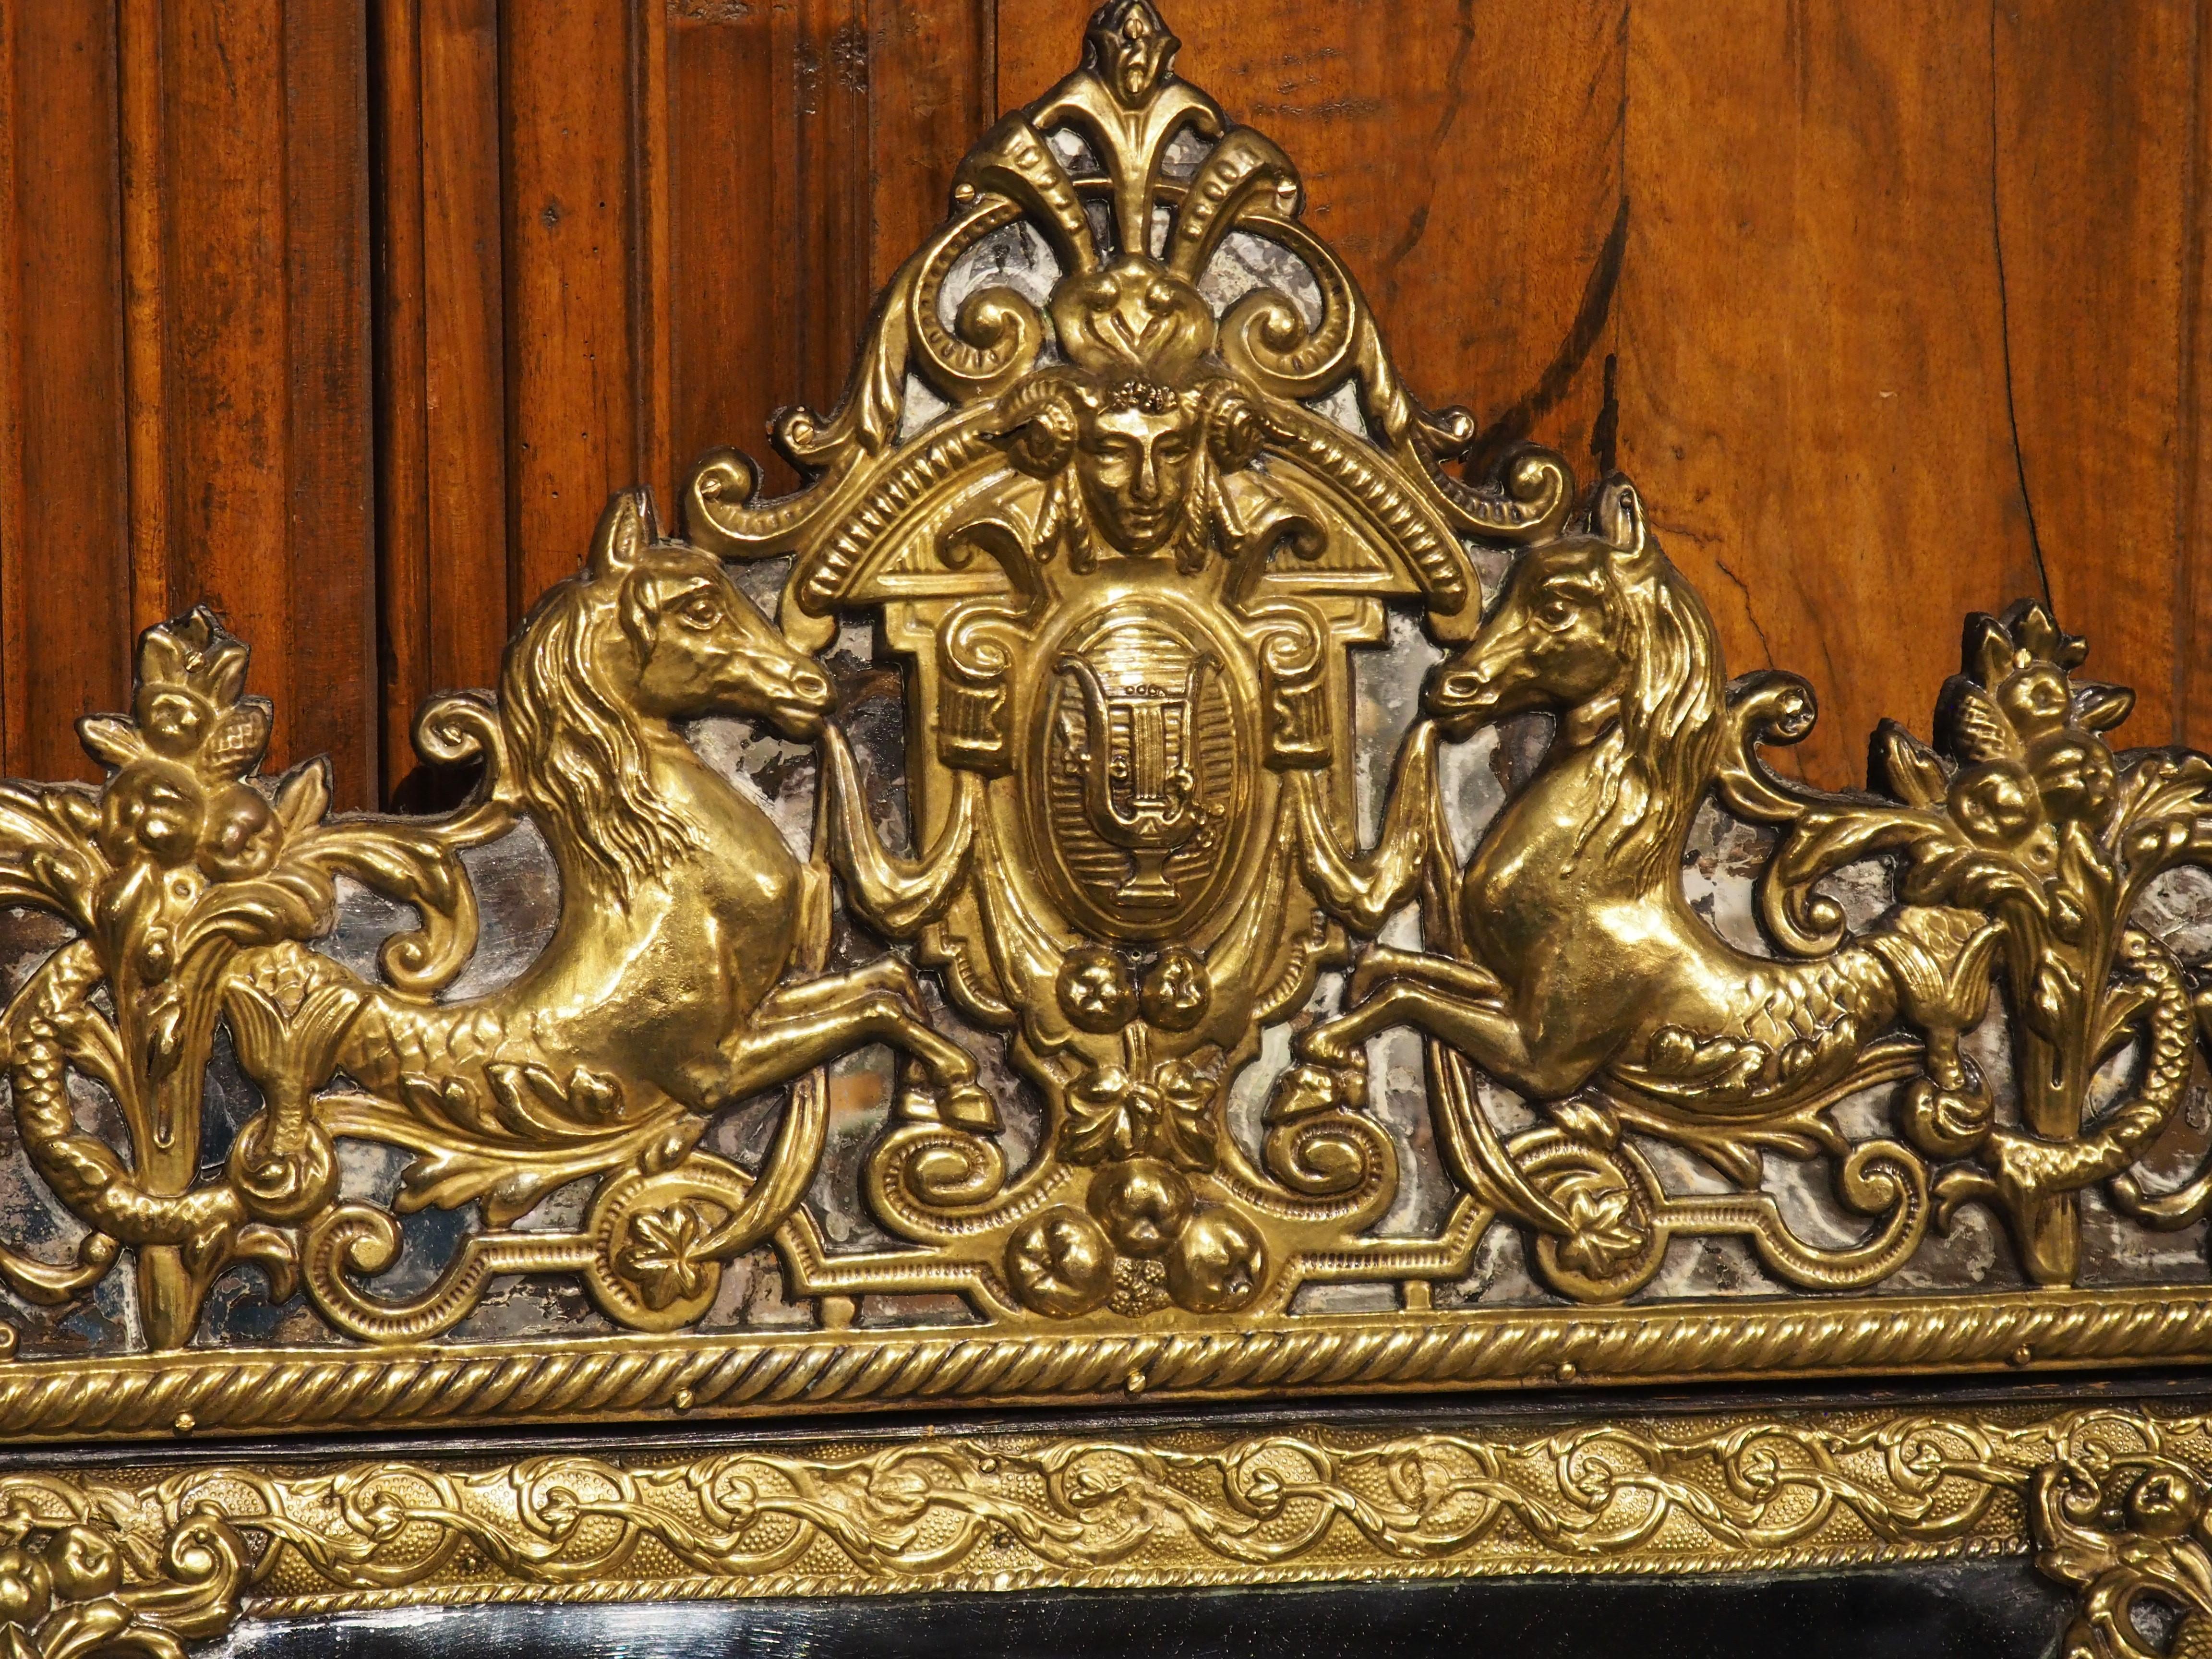 *Mirror can be hung horizontally, with slots available for crown to be mounted in either direction

Produced in the Netherlands, circa 1890, our repousse cushion mirror is adorned with lyre and seahorse motifs. Repousse is an artistic technique